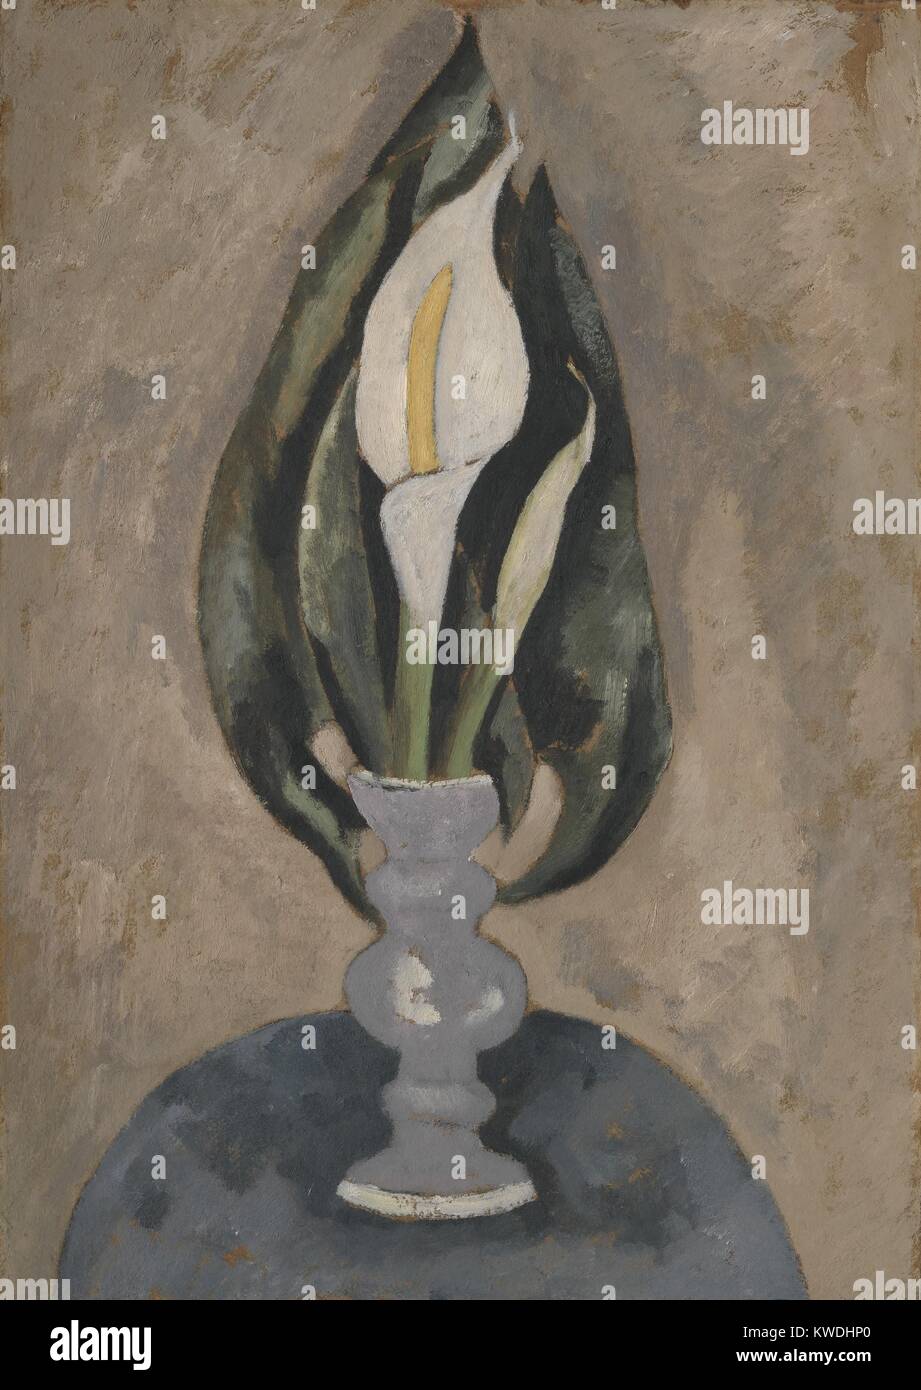 STILL LIFE NO. 16, by Marsden Hartley, 1920, American painting, oil on charcoal on paperboard. Still life painted in a Hartleys personal synthesis of Cubism and German Expressionism (BSLOC 2017 7 108) Stock Photo